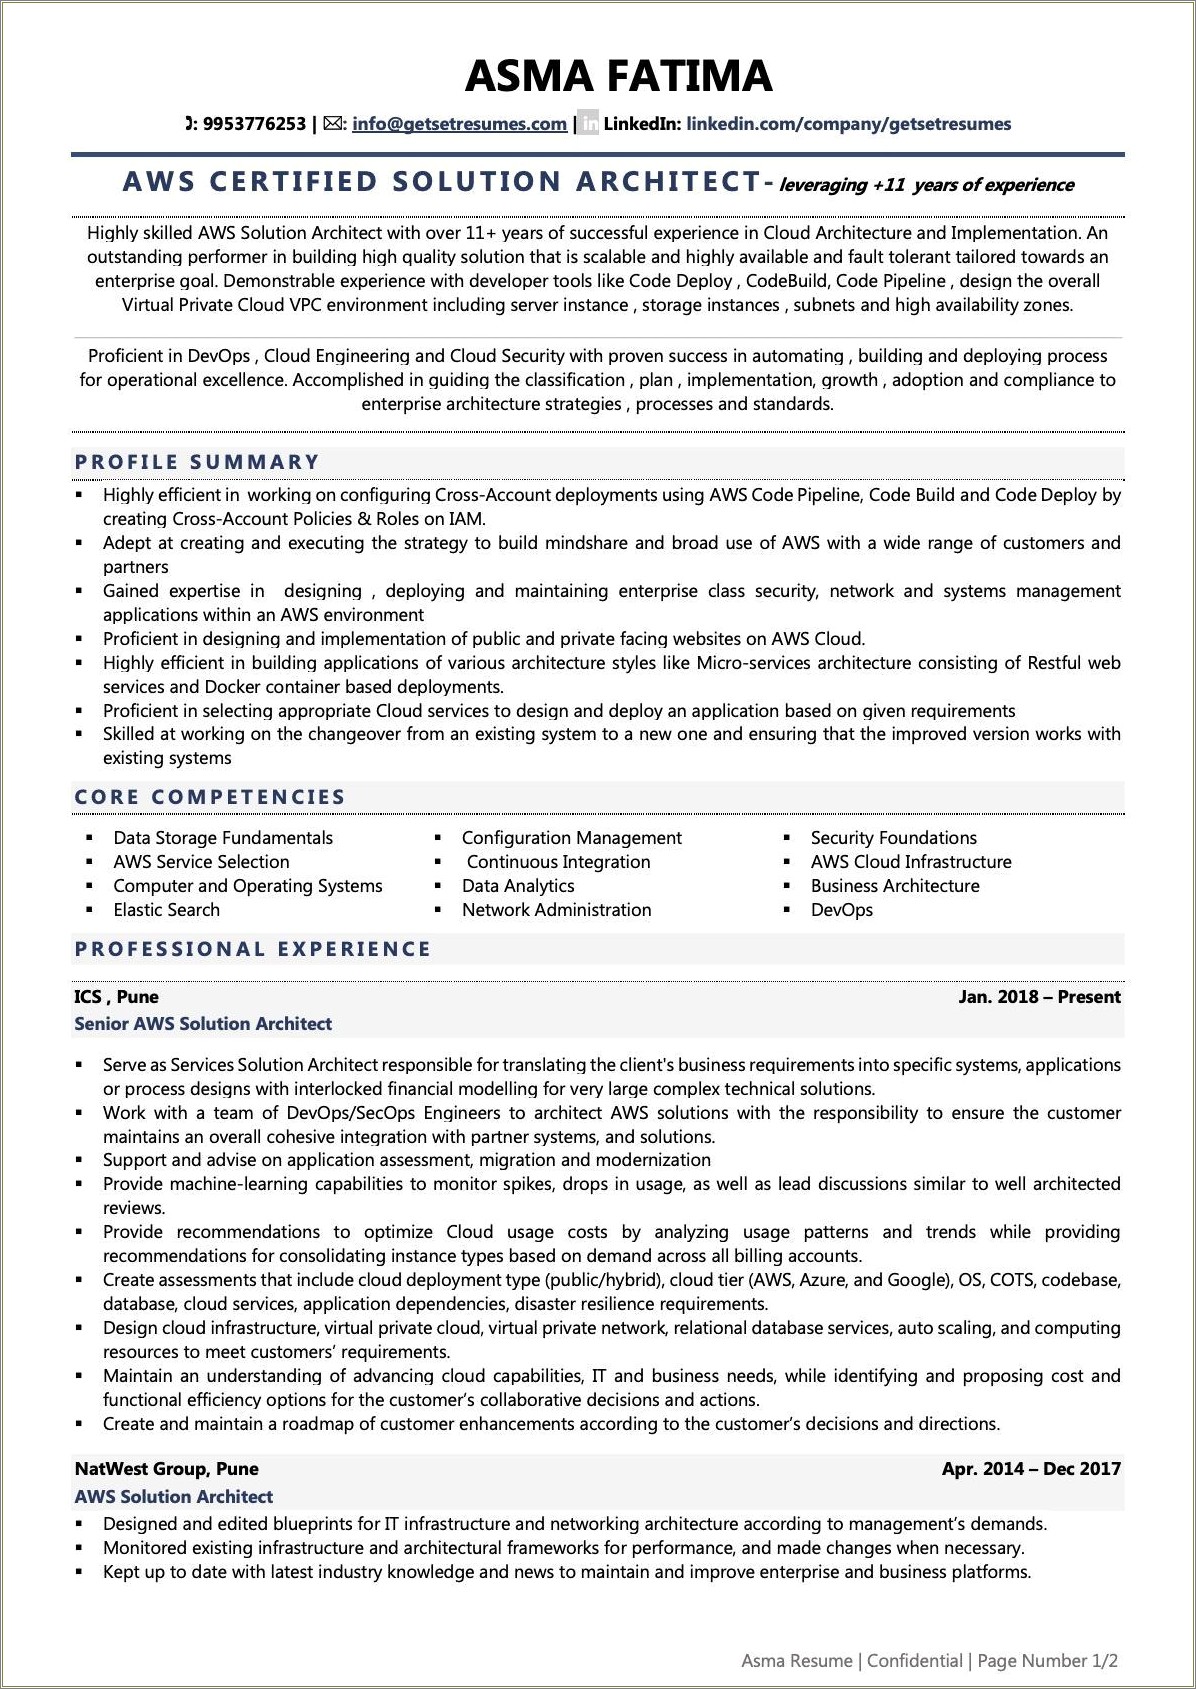 Azure Resume For 3 Years Experience